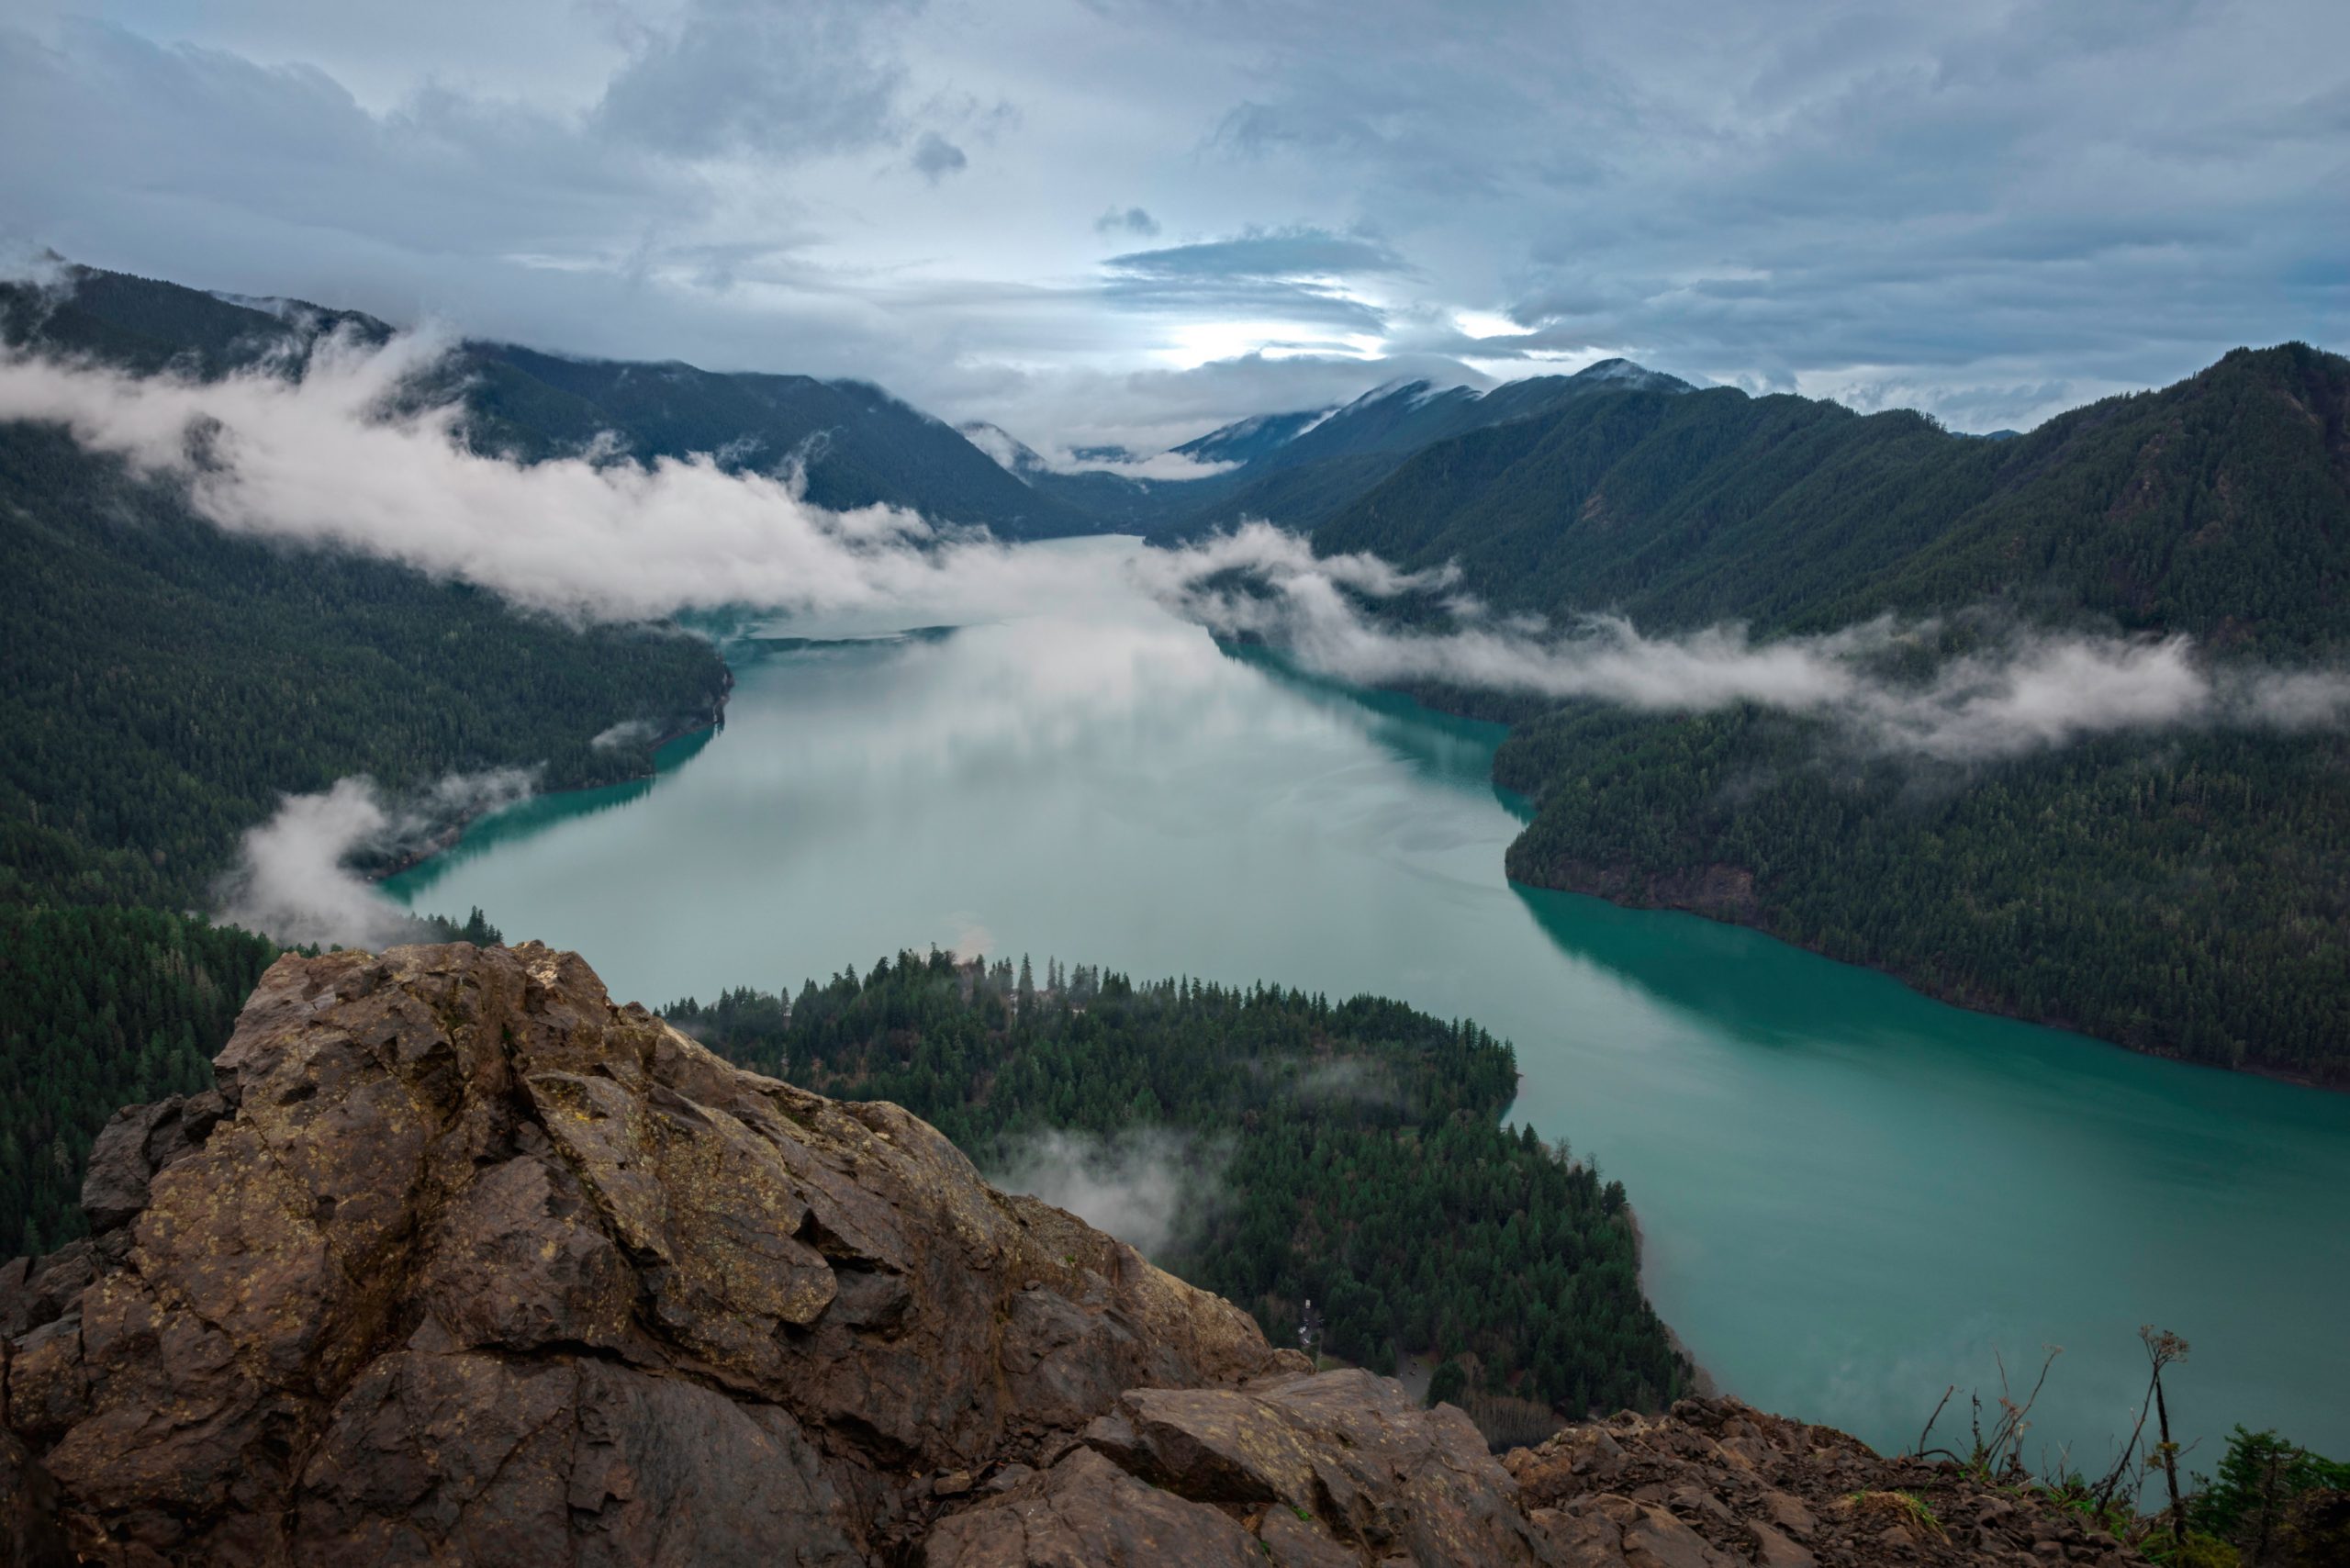 A view from atop a hill overlooking a vast and cloudy lake surrounded by forest and hills.